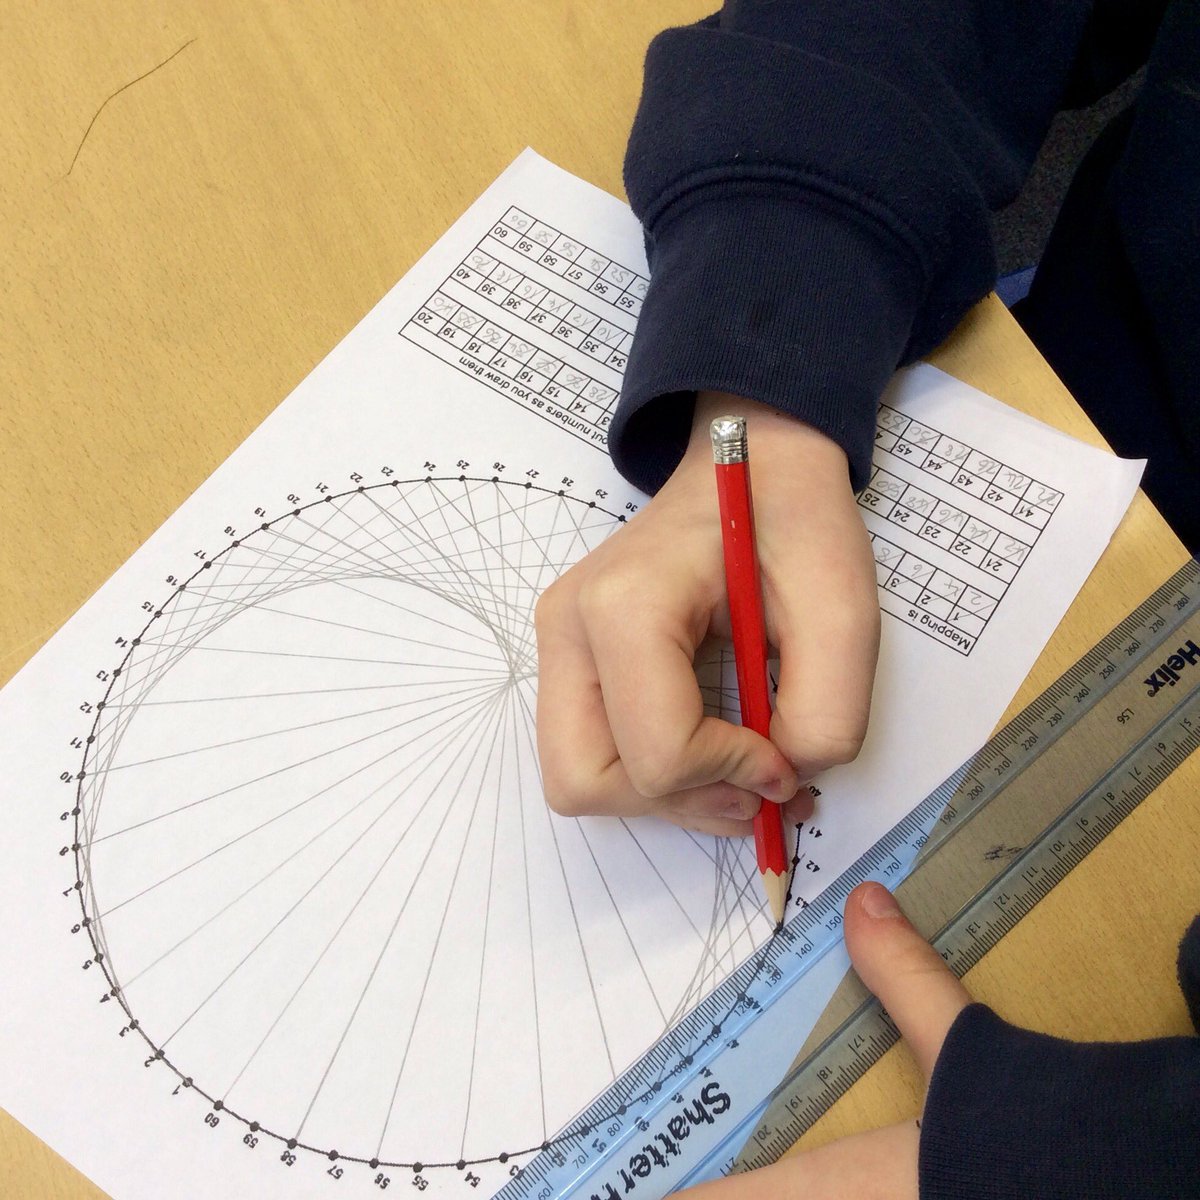 Good with a ruler and know your times tables? Then you might like to try an epicycloid or two! Printable templates and instructions are on my website here:  https://www.artfulmaths.com/mathematical-art-lessons.html